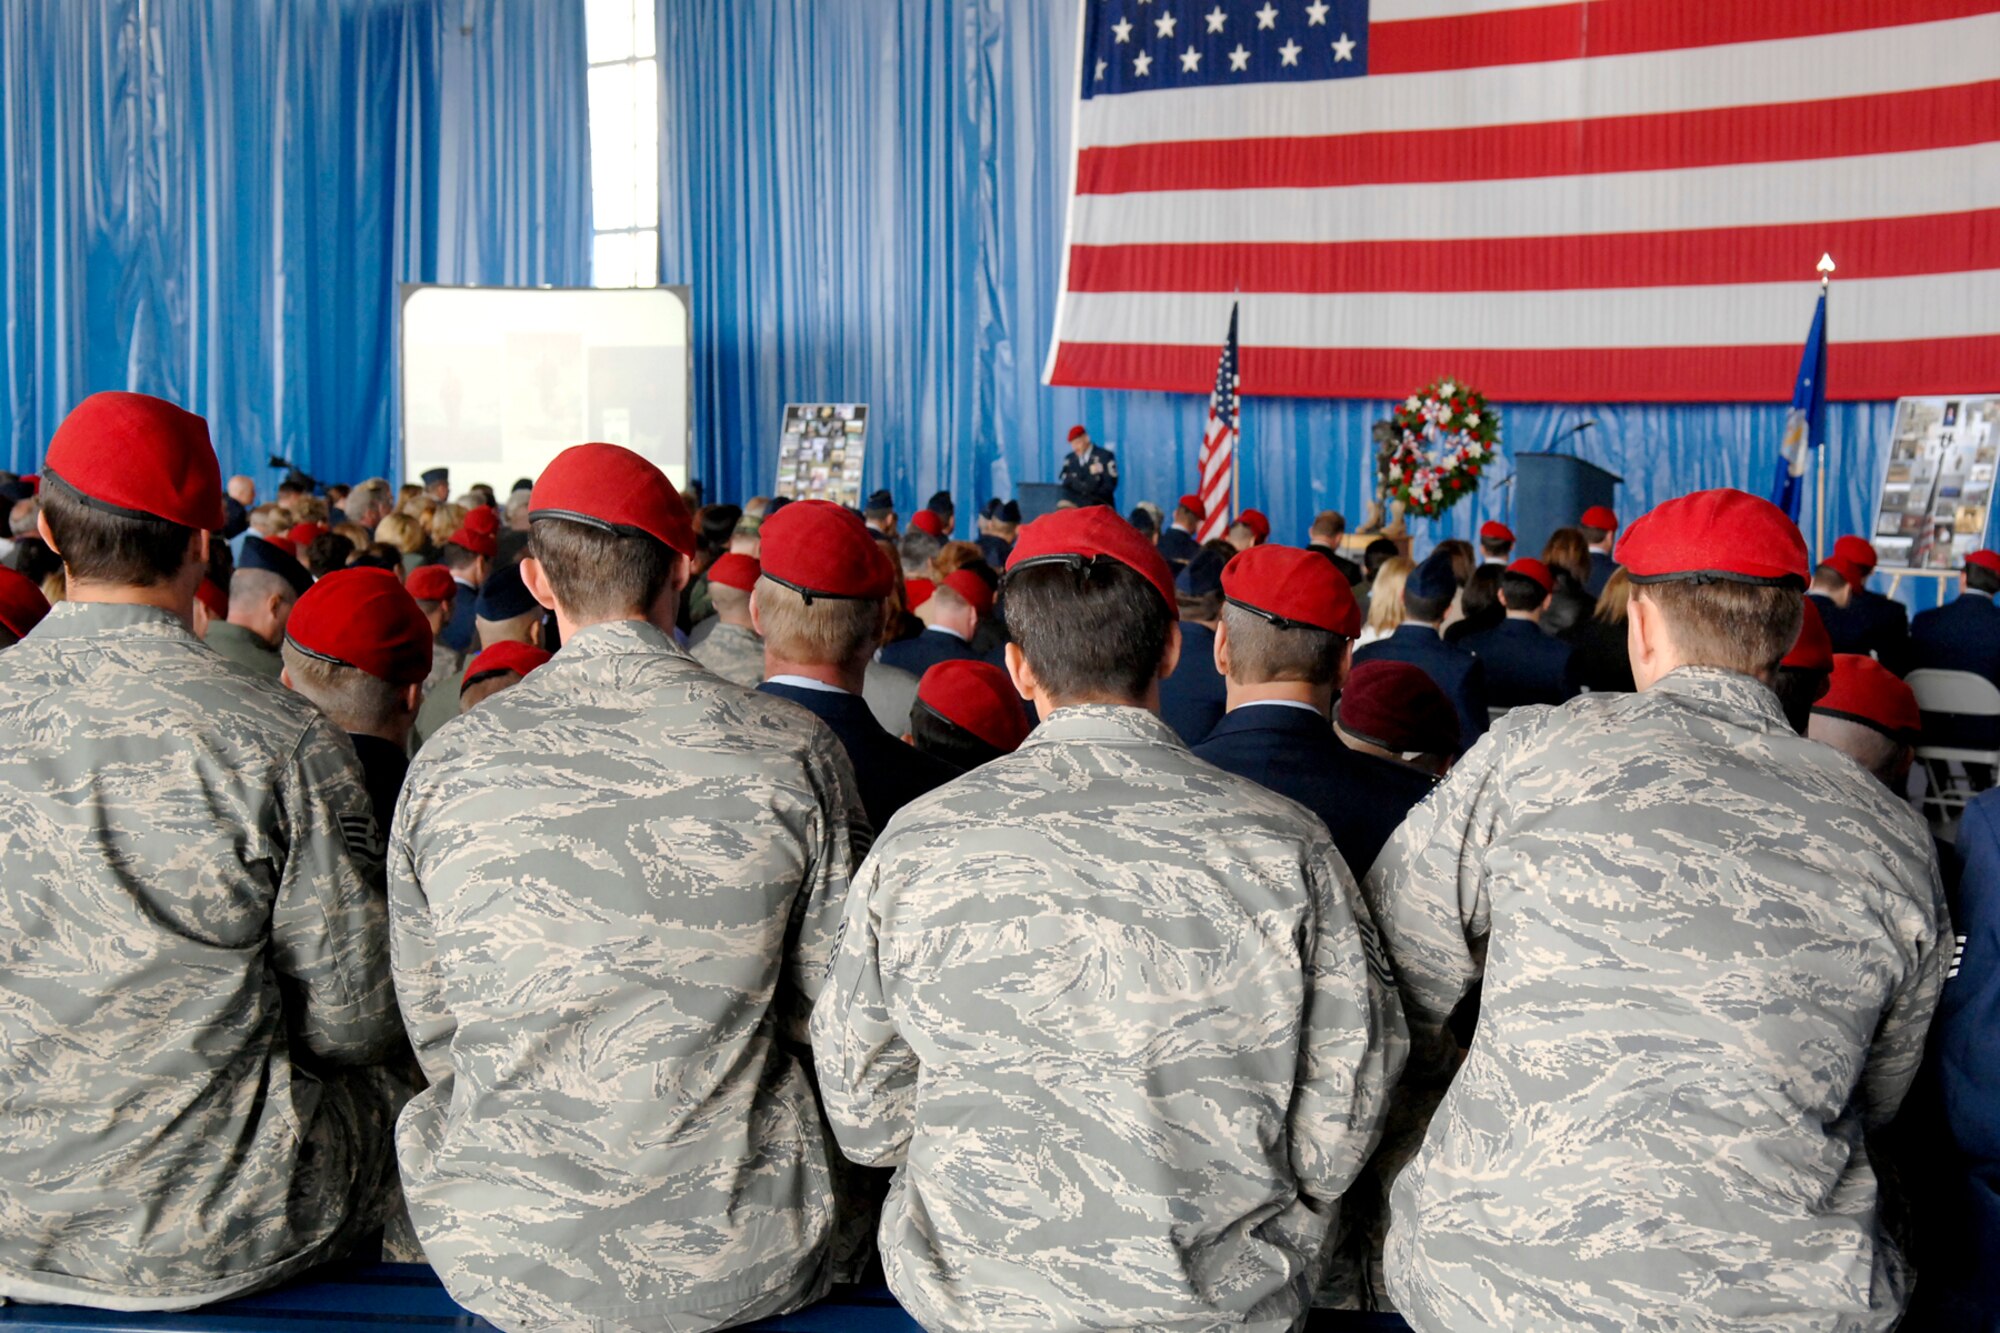 Mourners look on during the memorial ceremony for Tech. Sgt. William Jefferson Jr., 21st Special Tactics Squadron, at Hangar 4 on Pope Air Force Base March 26. Sergeant Jefferson died in support of Operation Enduring Freedom March 22. (U.S Air Force Photo by Mike Murchison)